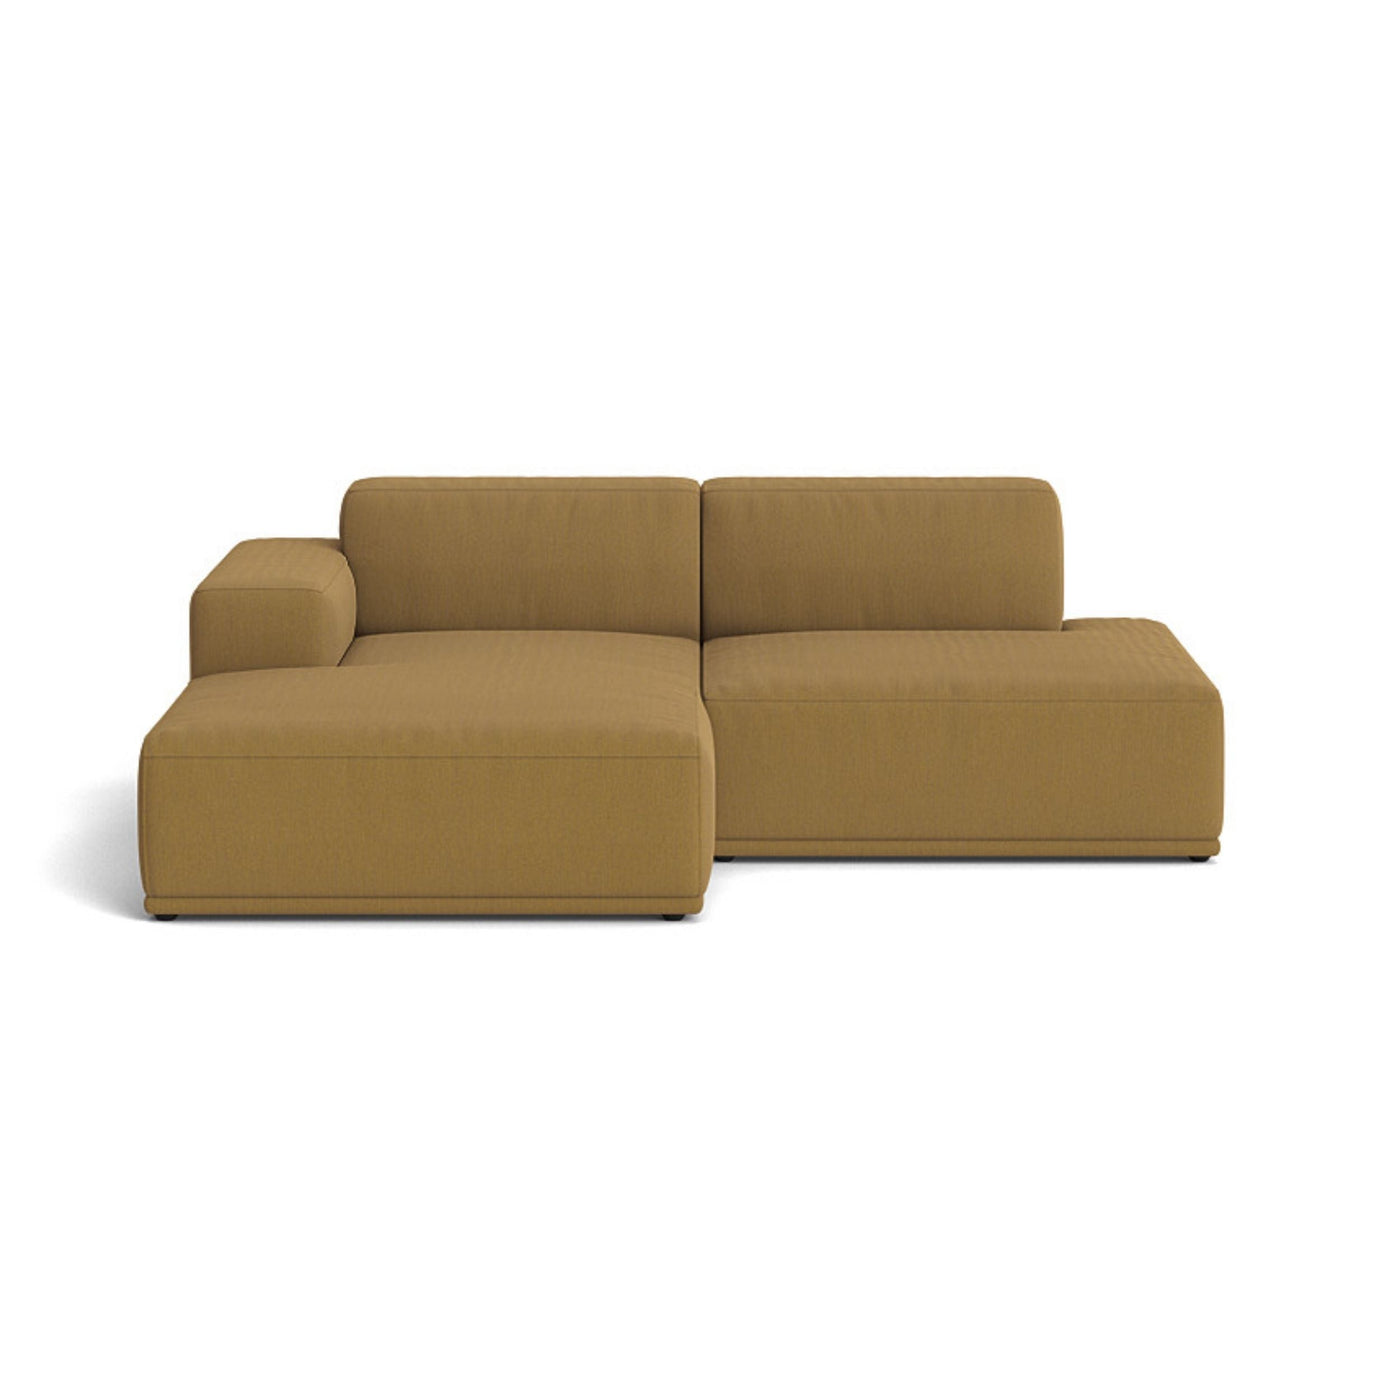 Muuto Connect Soft Modular 2 Seater Sofa, configuration 3. made-to-order from someday designs. #colour_re-wool-448